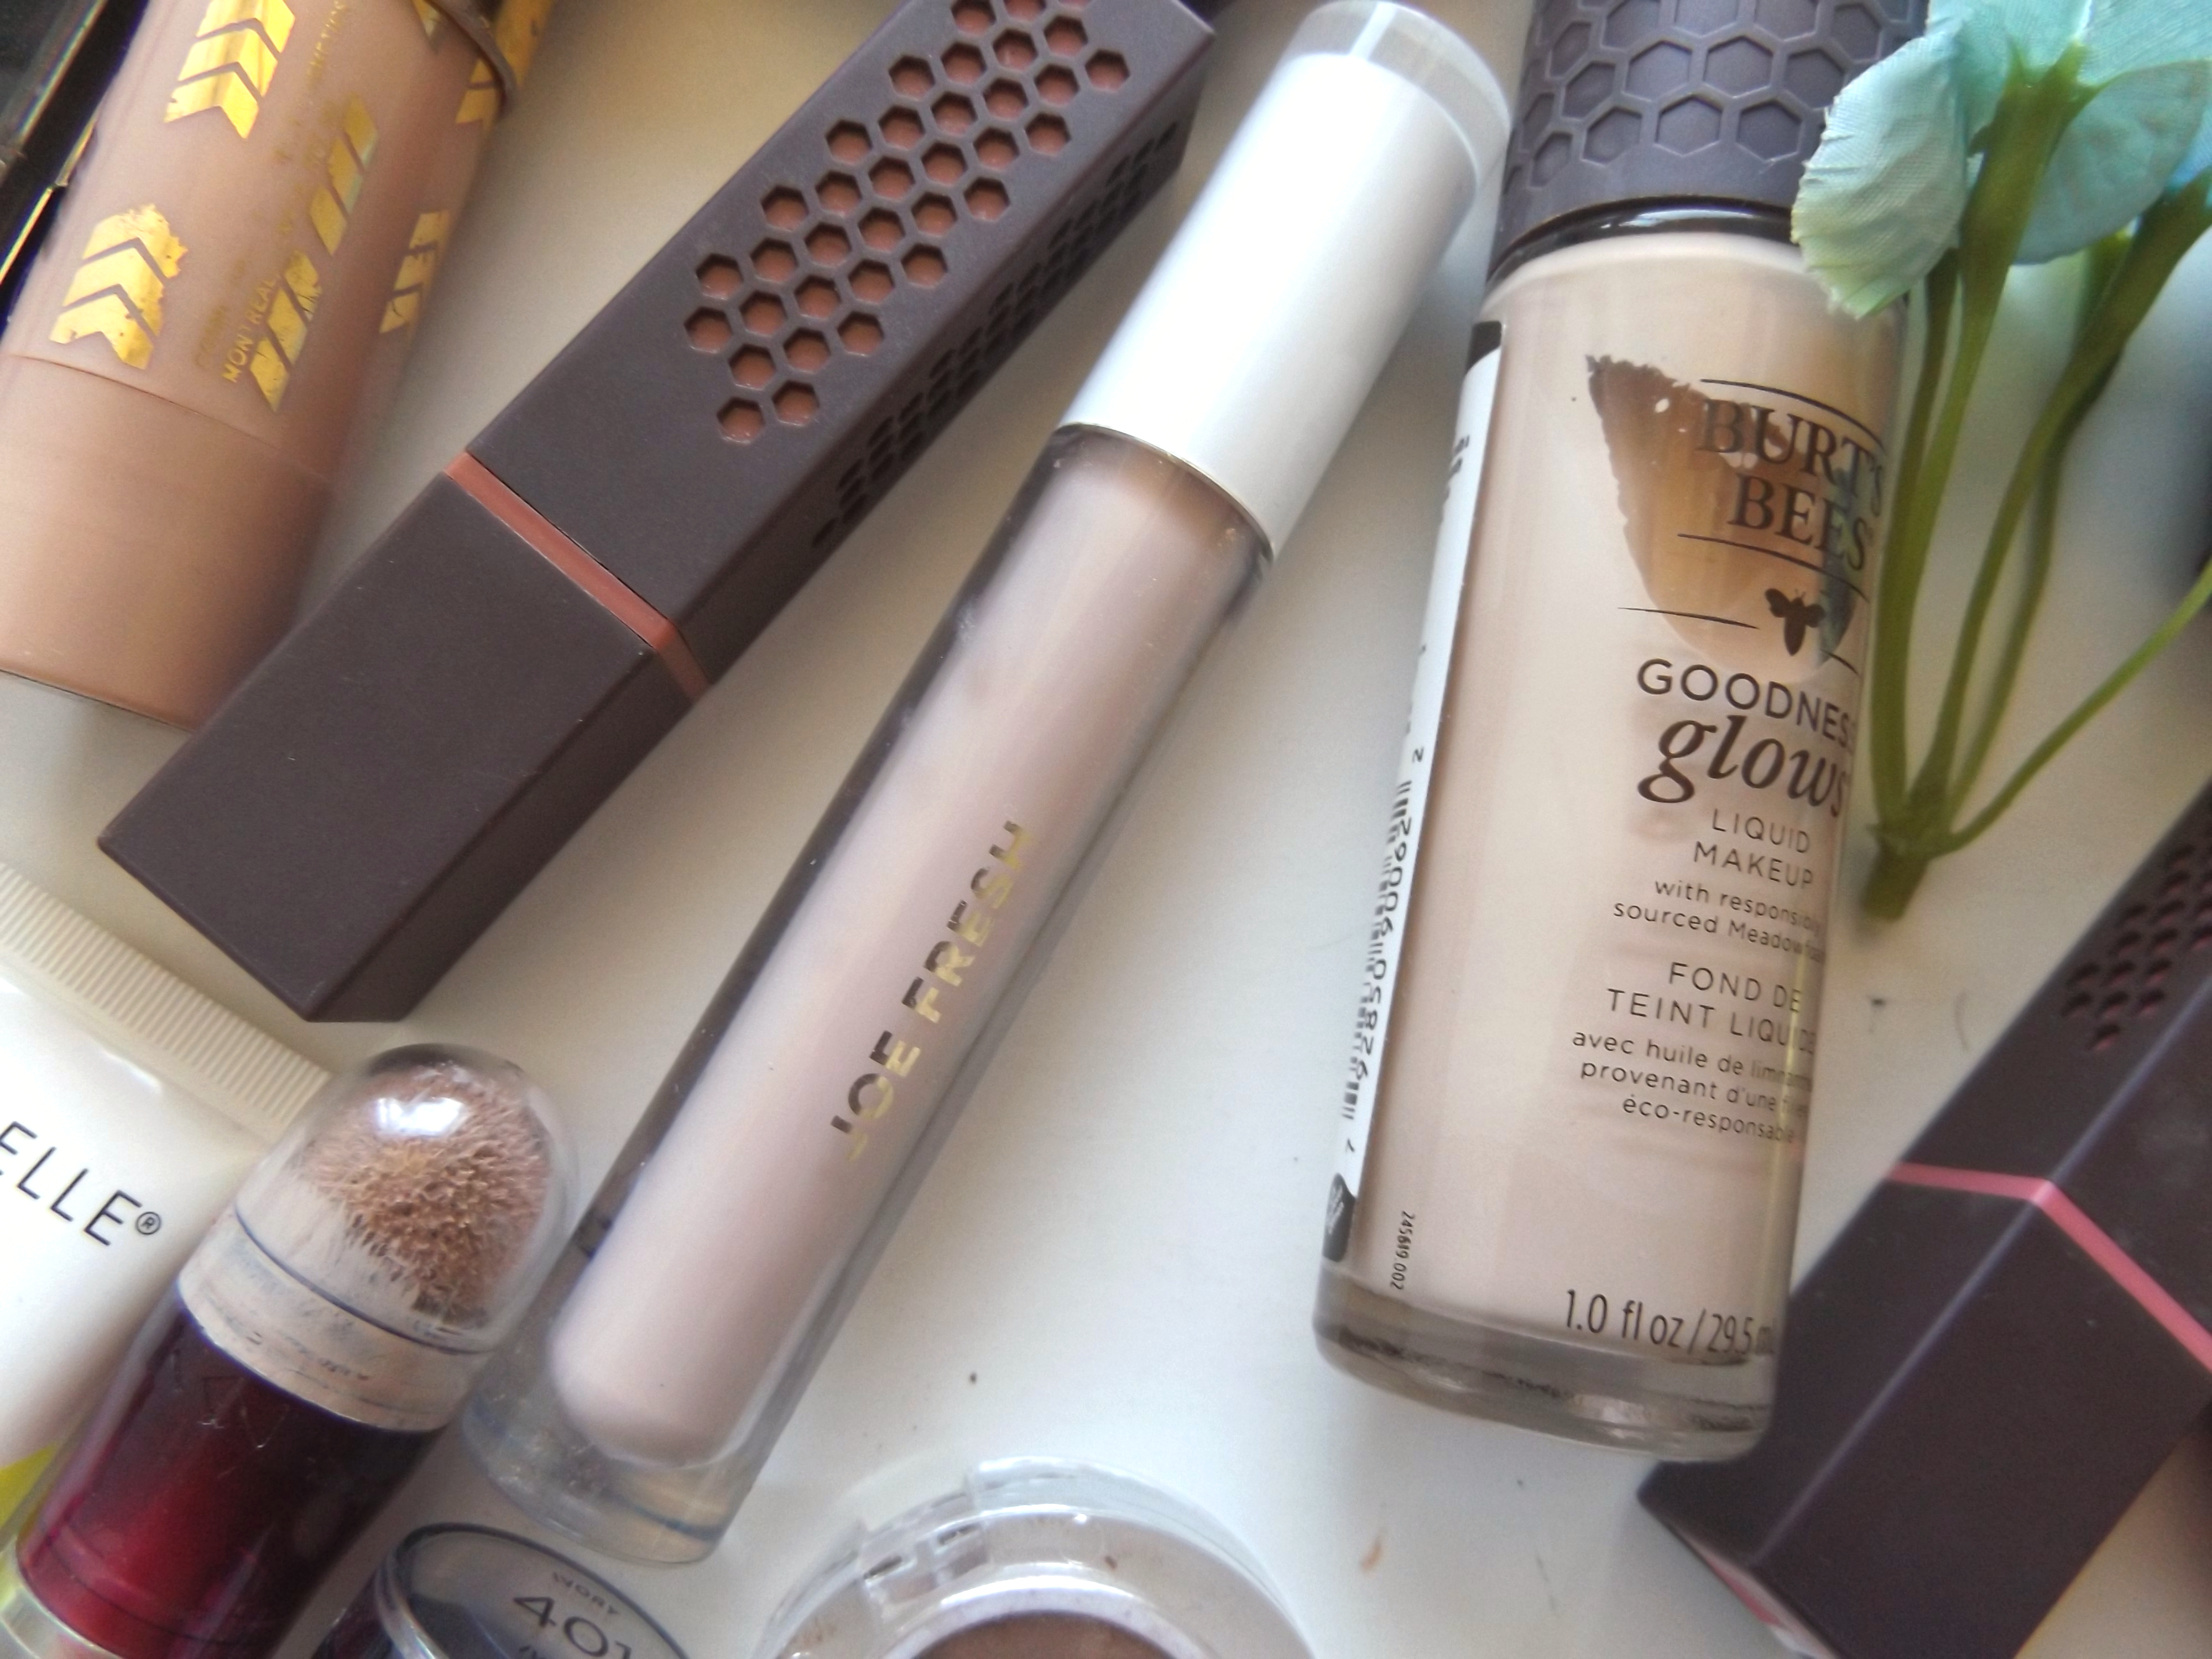 Joe fresh concealer and Burt's Bees Goodness Glows foundation product shot 